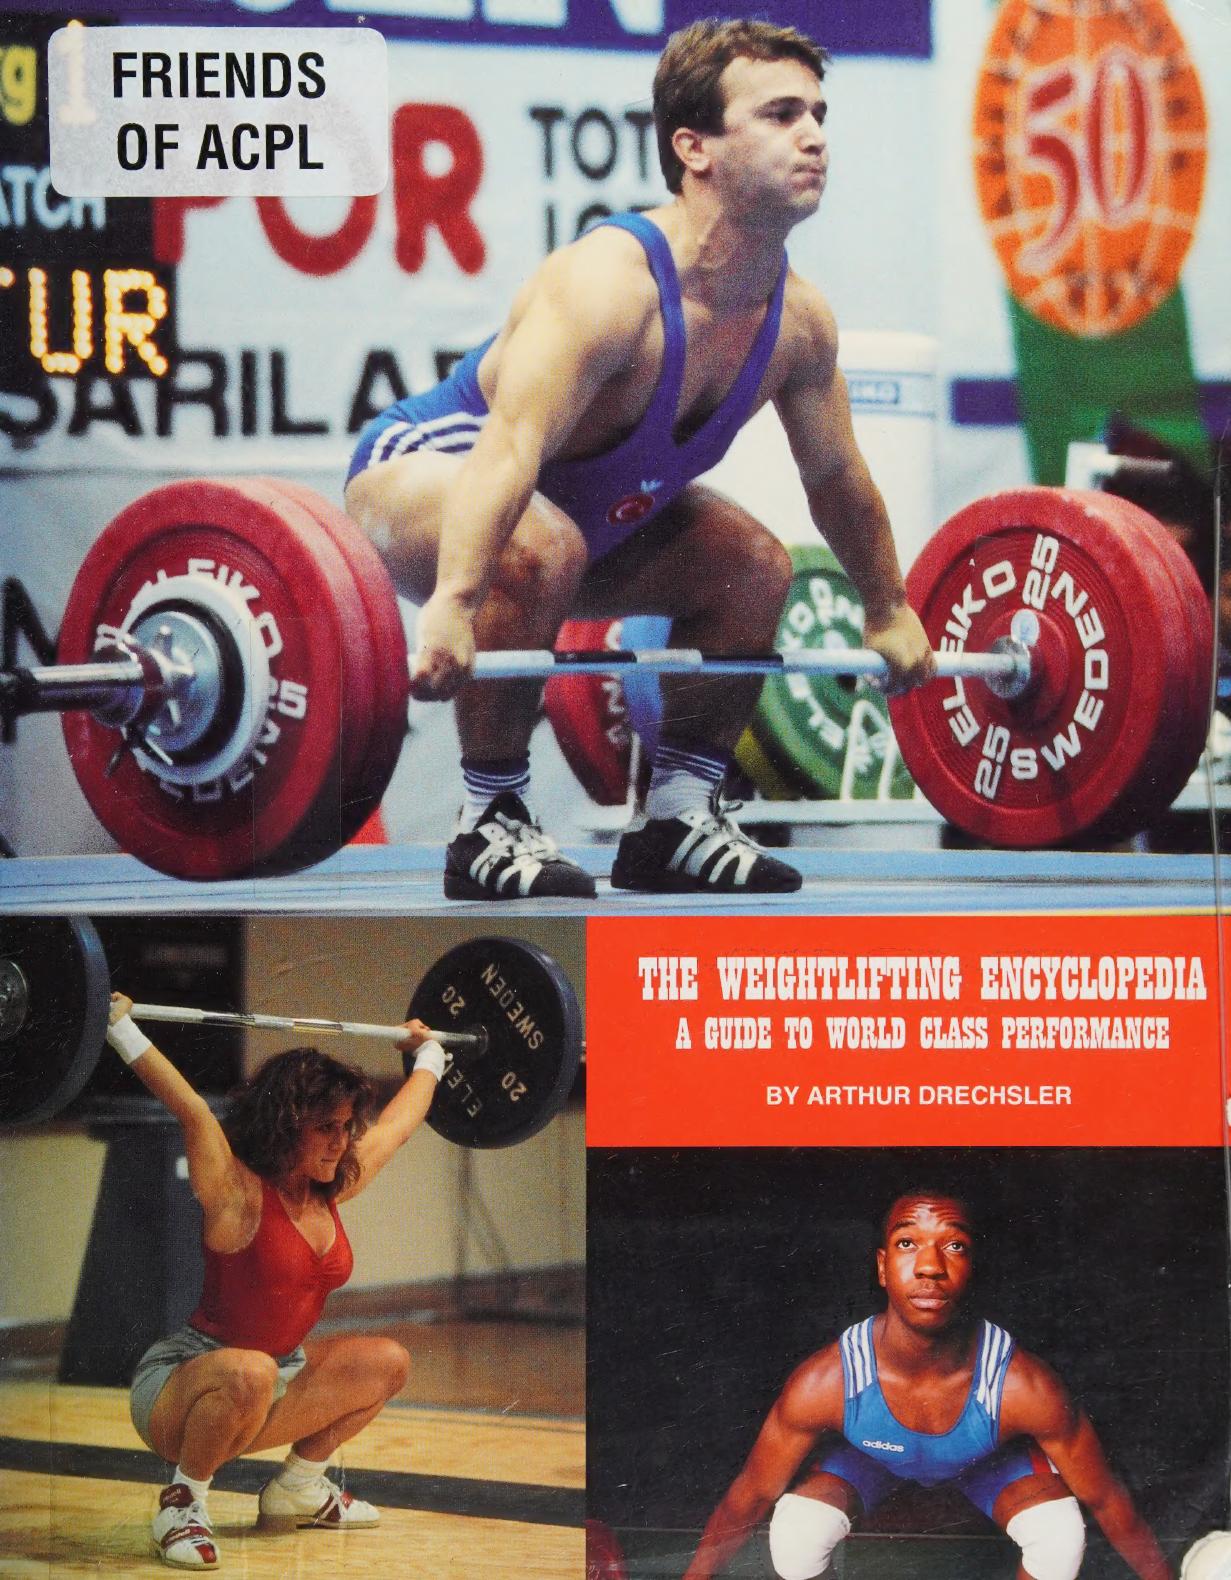 The Weightlifting Encyclopedia: A Guide to World Class Performance by Arthur Drechsler